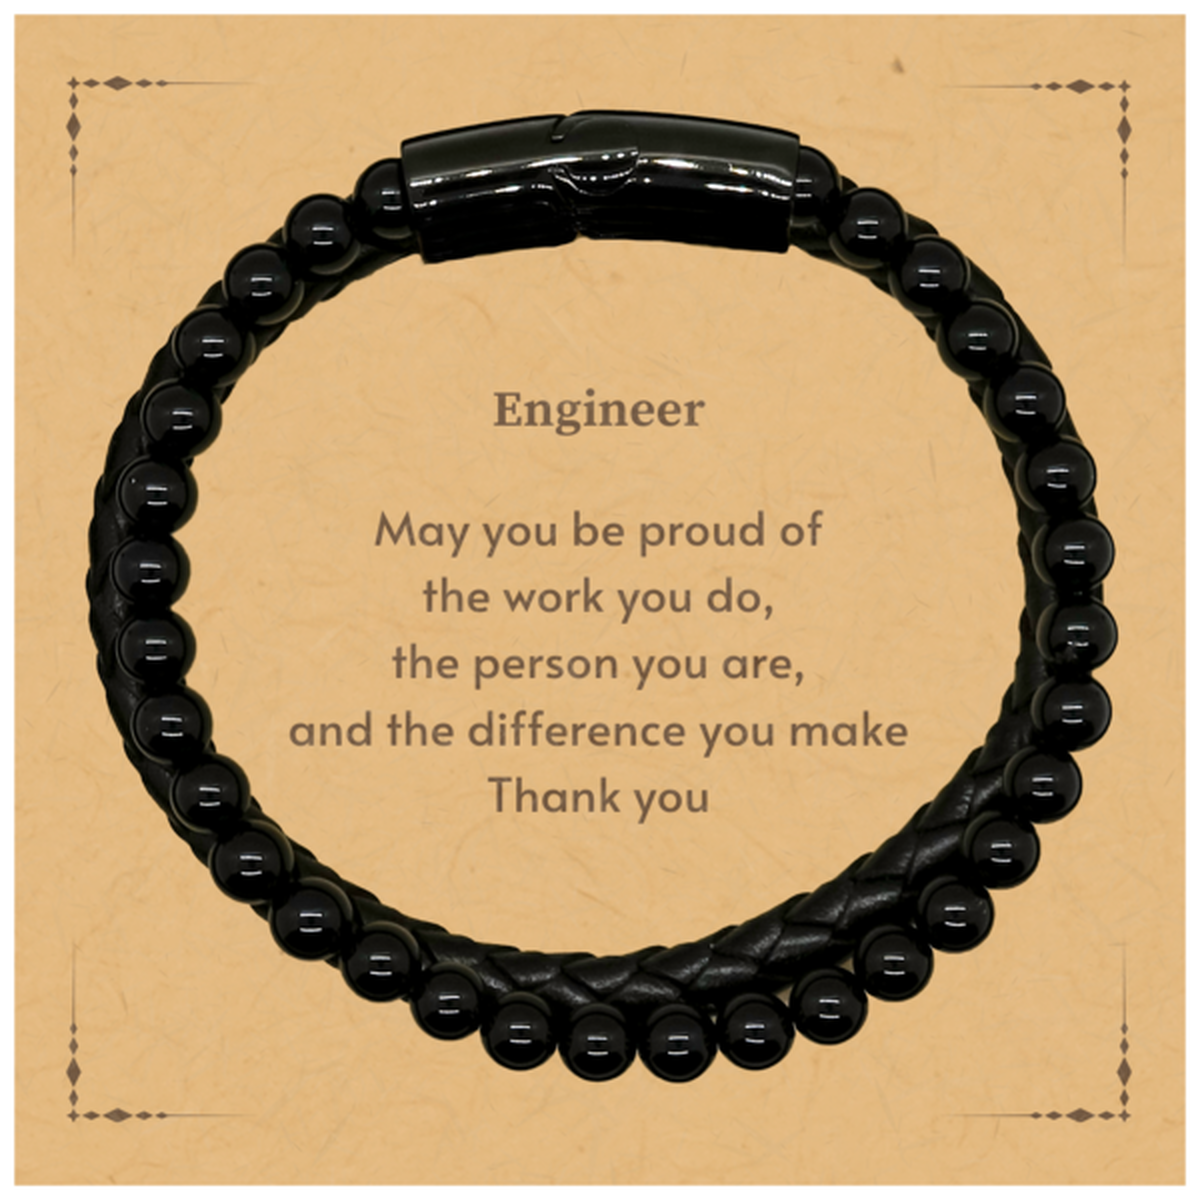 Heartwarming Stone Leather Bracelets Retirement Coworkers Gifts for Engineer, Engineer May You be proud of the work you do, the person you are Gifts for Boss Men Women Friends